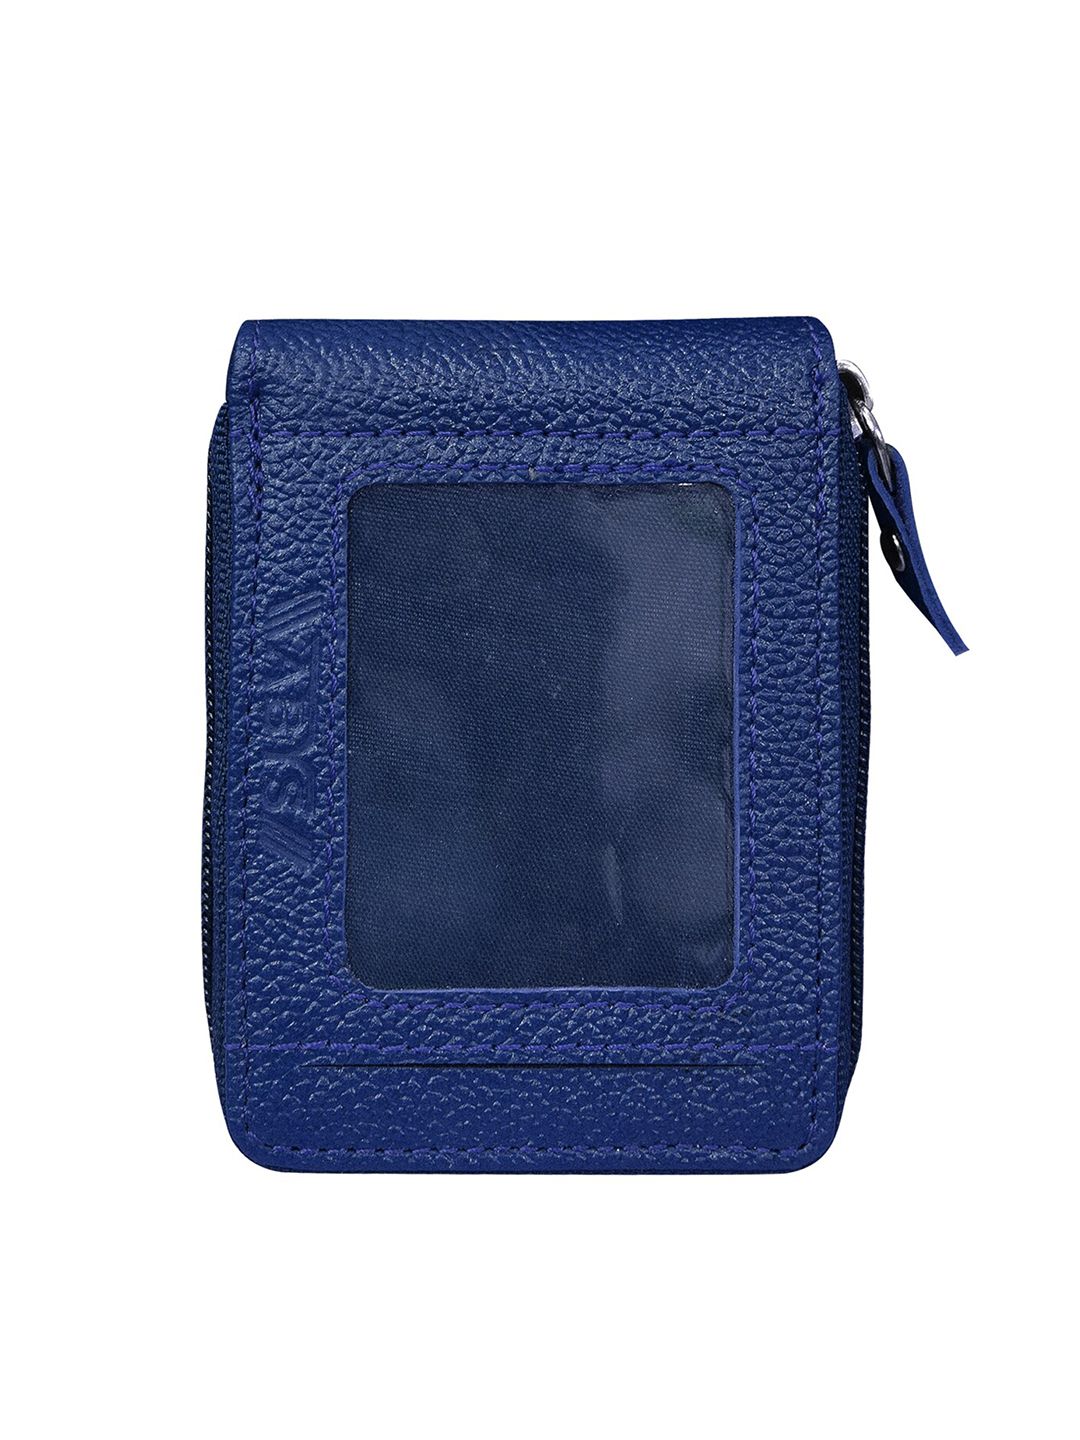 ABYS Unisex Blue Textured Leather Zip Around Wallet Price in India